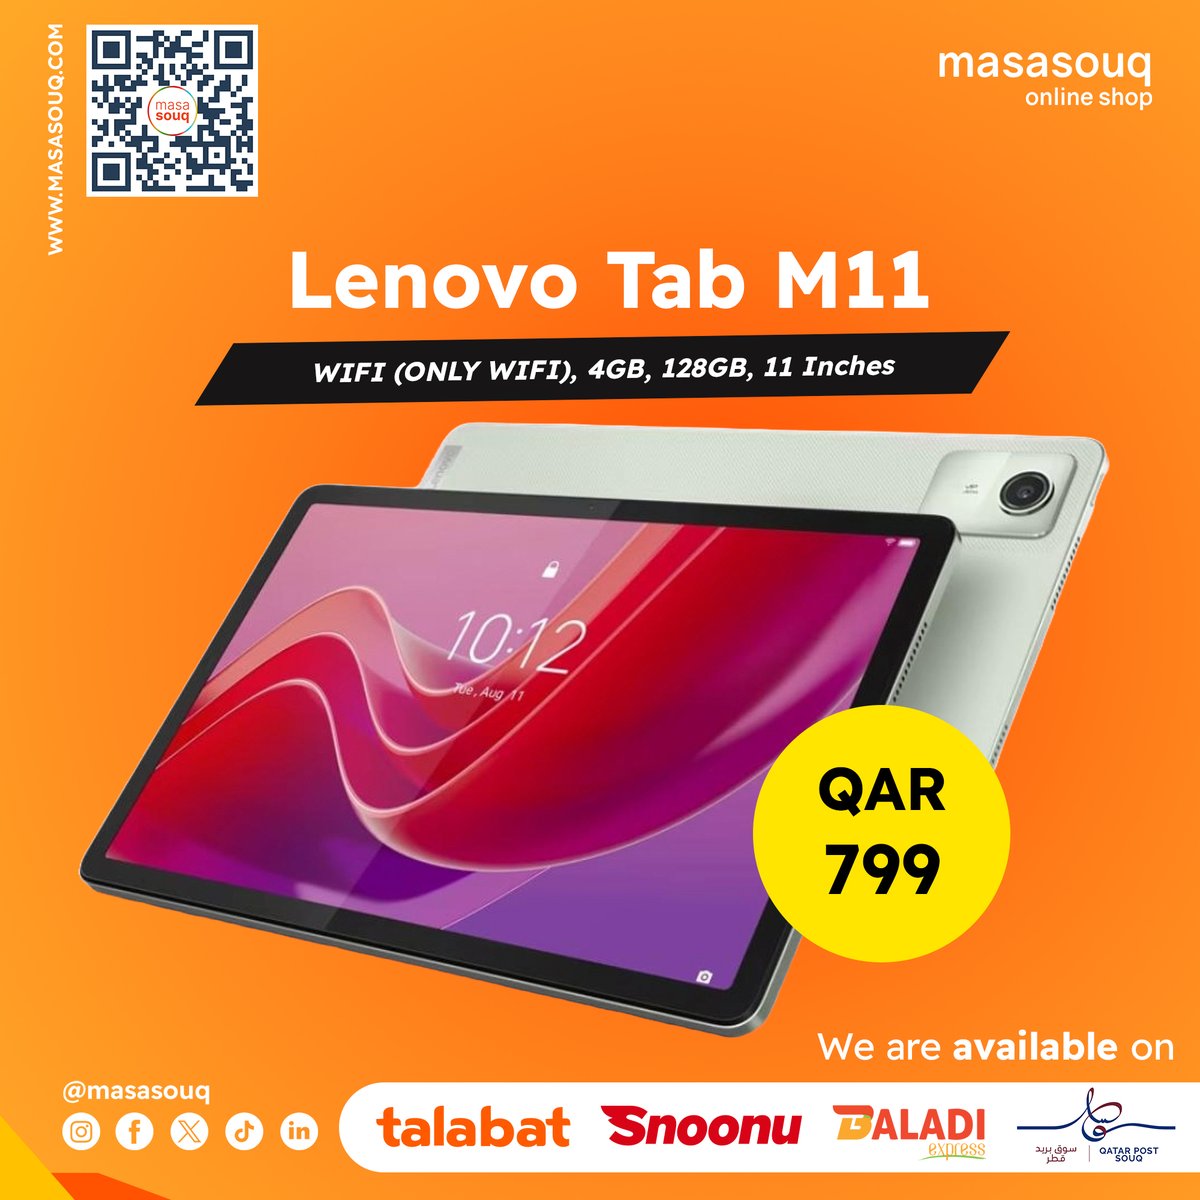 Supercharge your entertainment! ✨ The Lenovo Tab M11 boasts a spacious 11-inch display, ample memory, and awesome battery life. Perfect for movies, games, and browsing. QAR799 👉 masasouq.com/lenovo-tab-m11…

#Lenovo #LenovoTabM11 #tablet #Android  #gaming #browsing #Qatar #Masasouq